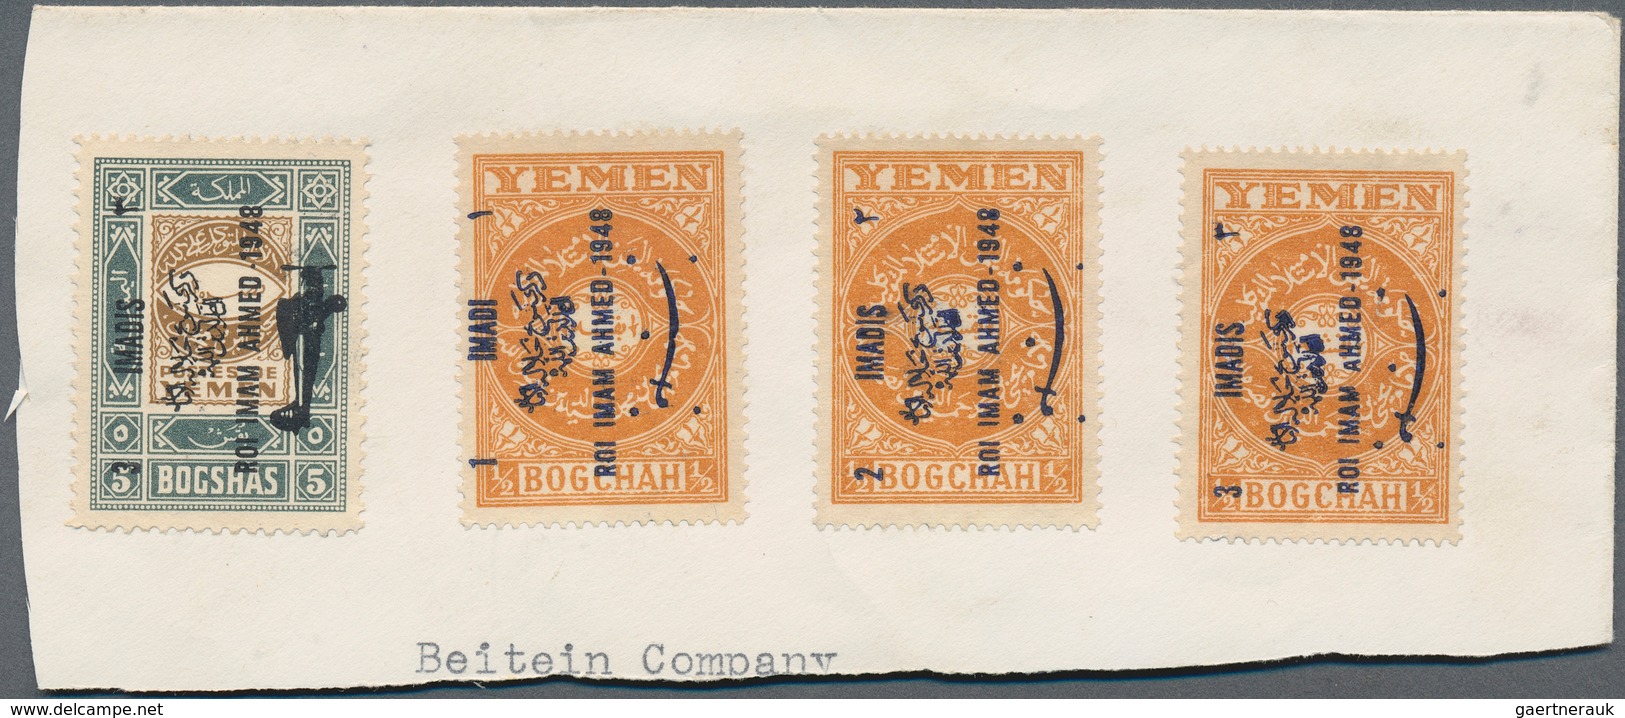 23012 Jemen: 1948 Group Of 24 Unissued Stamps, 13 Of Them Optd. "ROI IMAM AHMED-1948" Incl. 10 For Airmail - Yémen